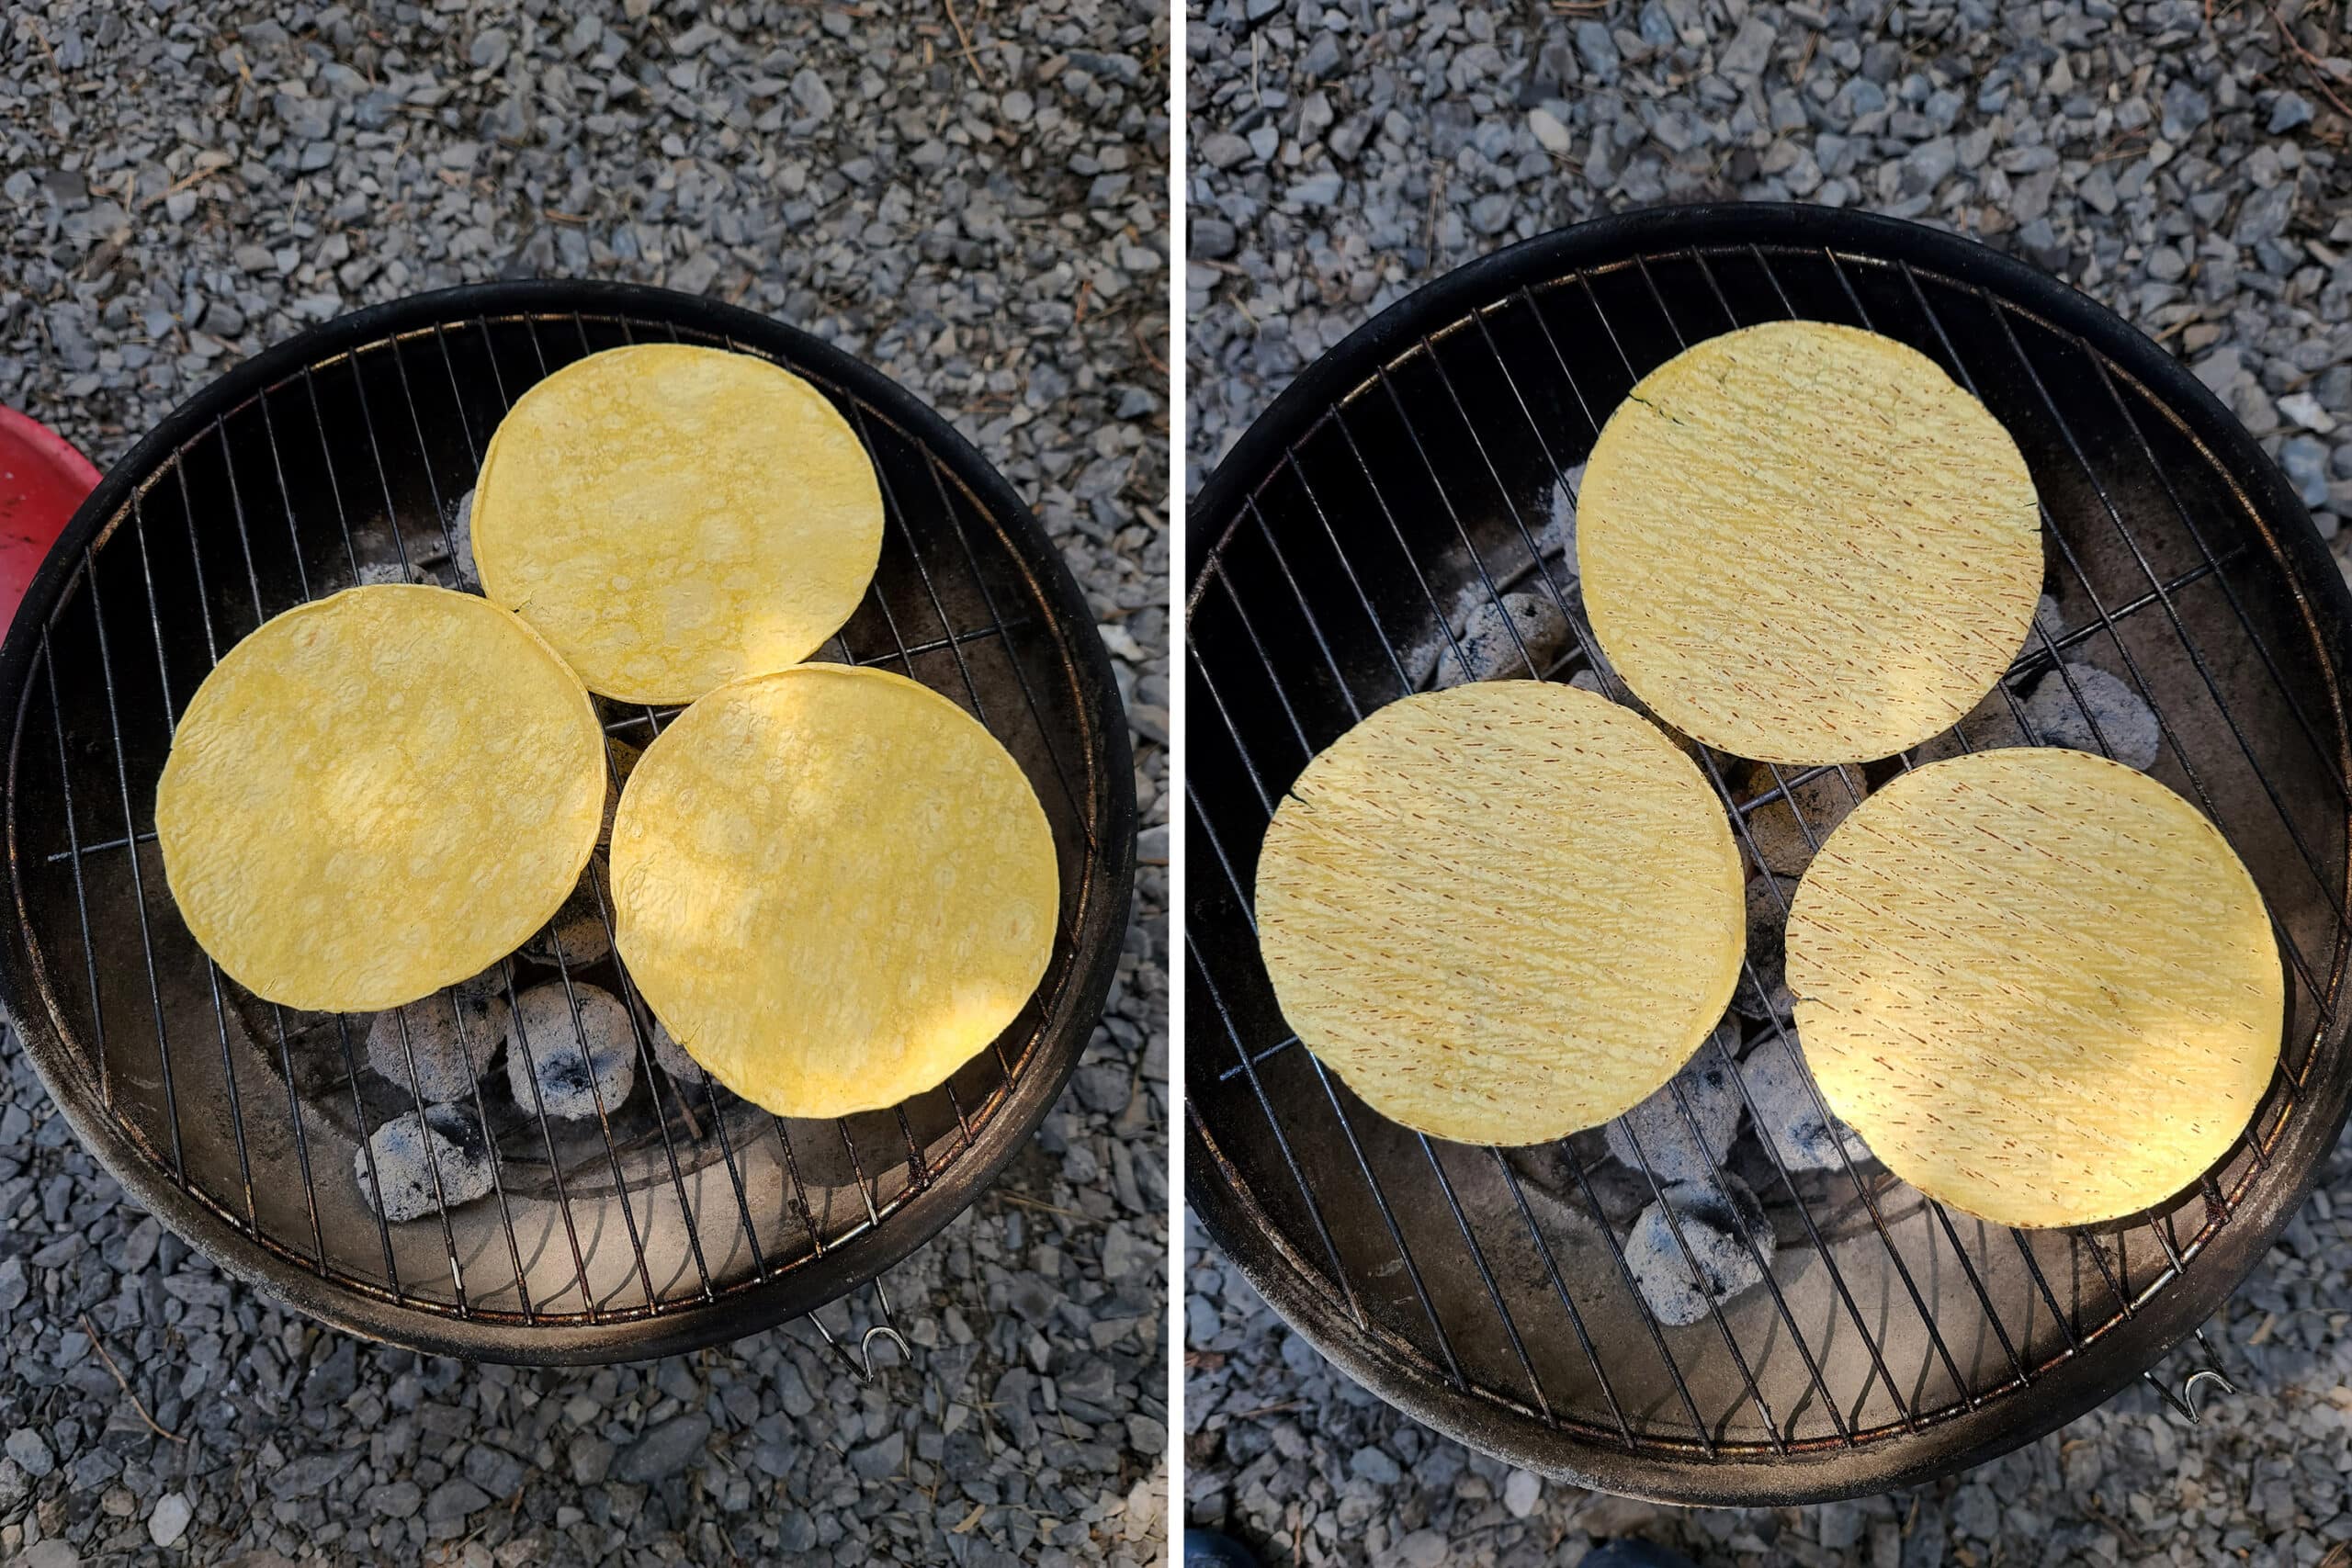 2 part image showing yellow corn tortillas heating up over a charcoal camp grill.